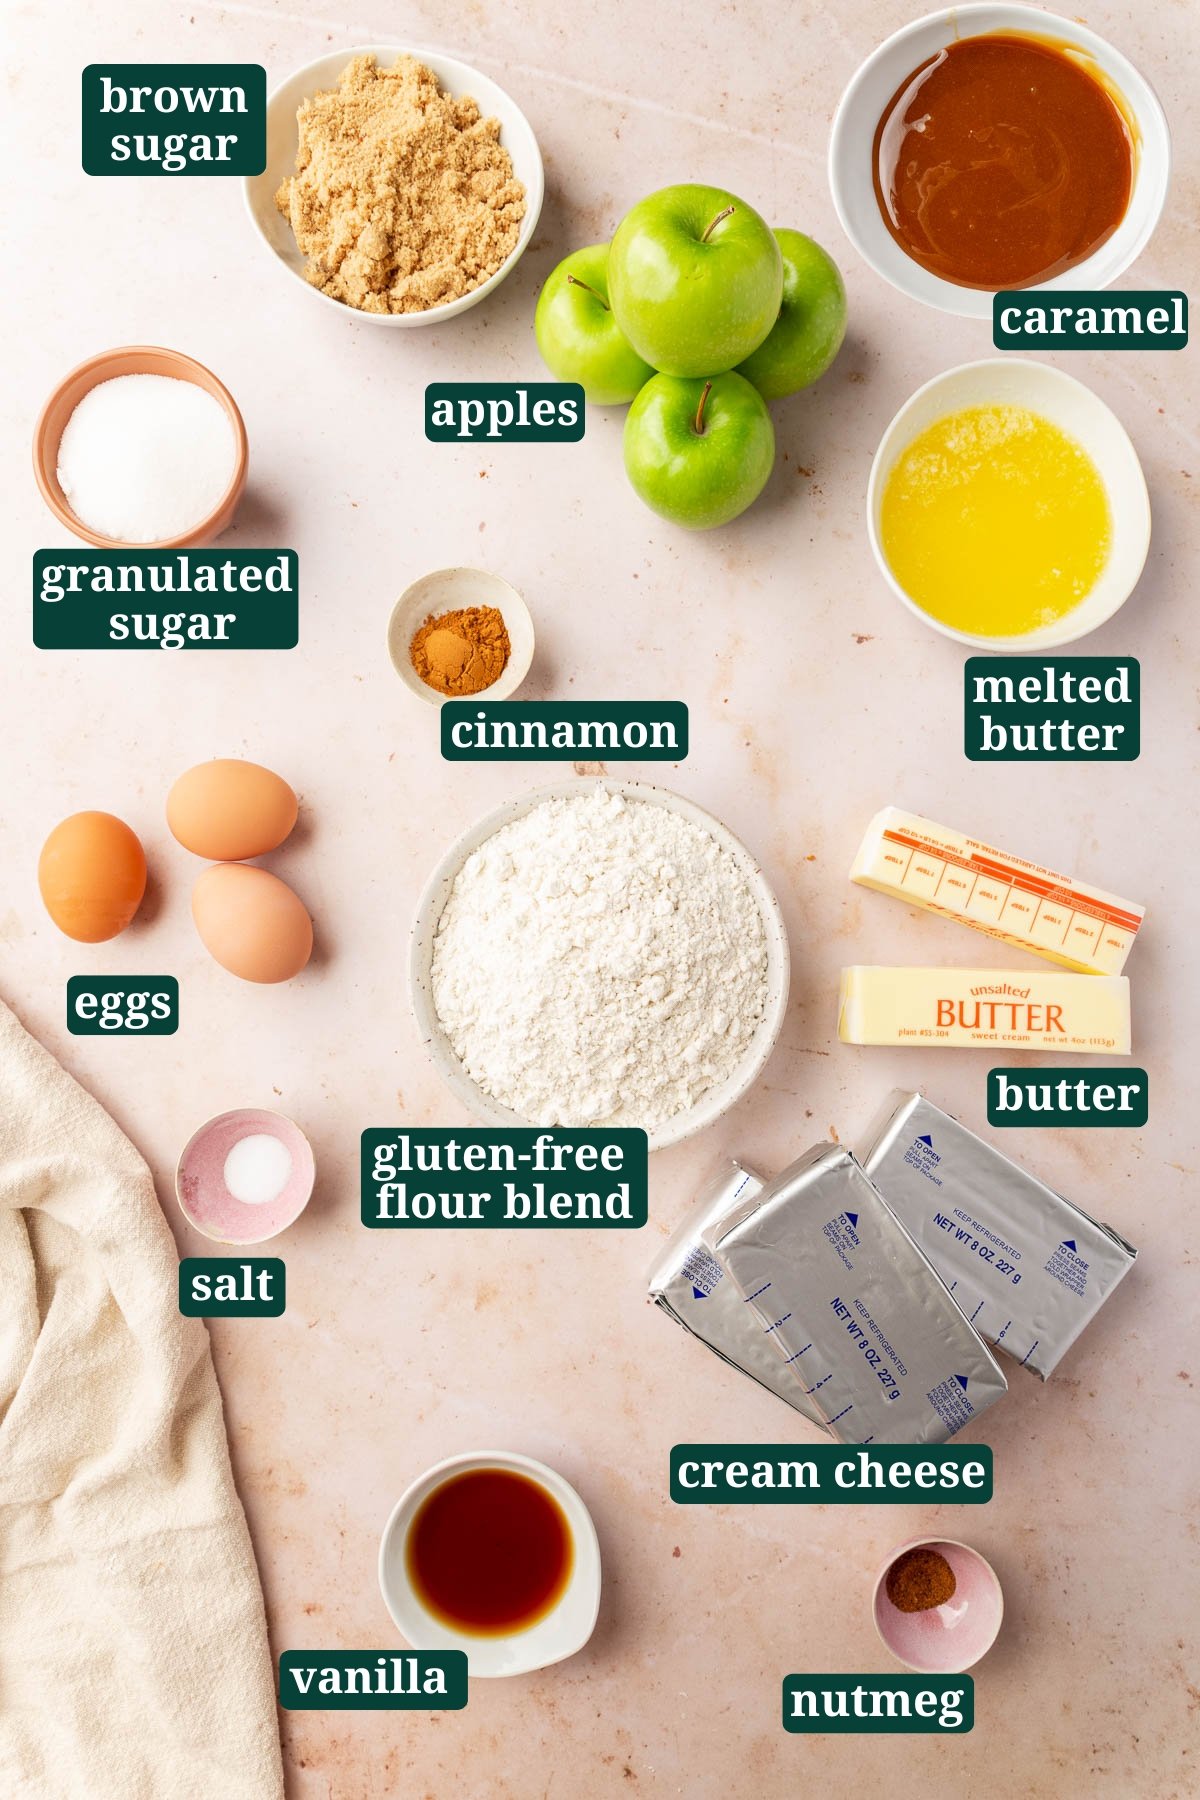 Ingredients in small bowls to make gluten free caramel apple cheesecake bars, including brown sugar, green apples, caramel sauce, granulated sugar, ground cinnamon, melted butter, eggs, gluten-free flour, two sticks of unsalted butter, salt, three cream cheese bricks, vanilla extract and ground nutmeg with text overlays over each ingredient.